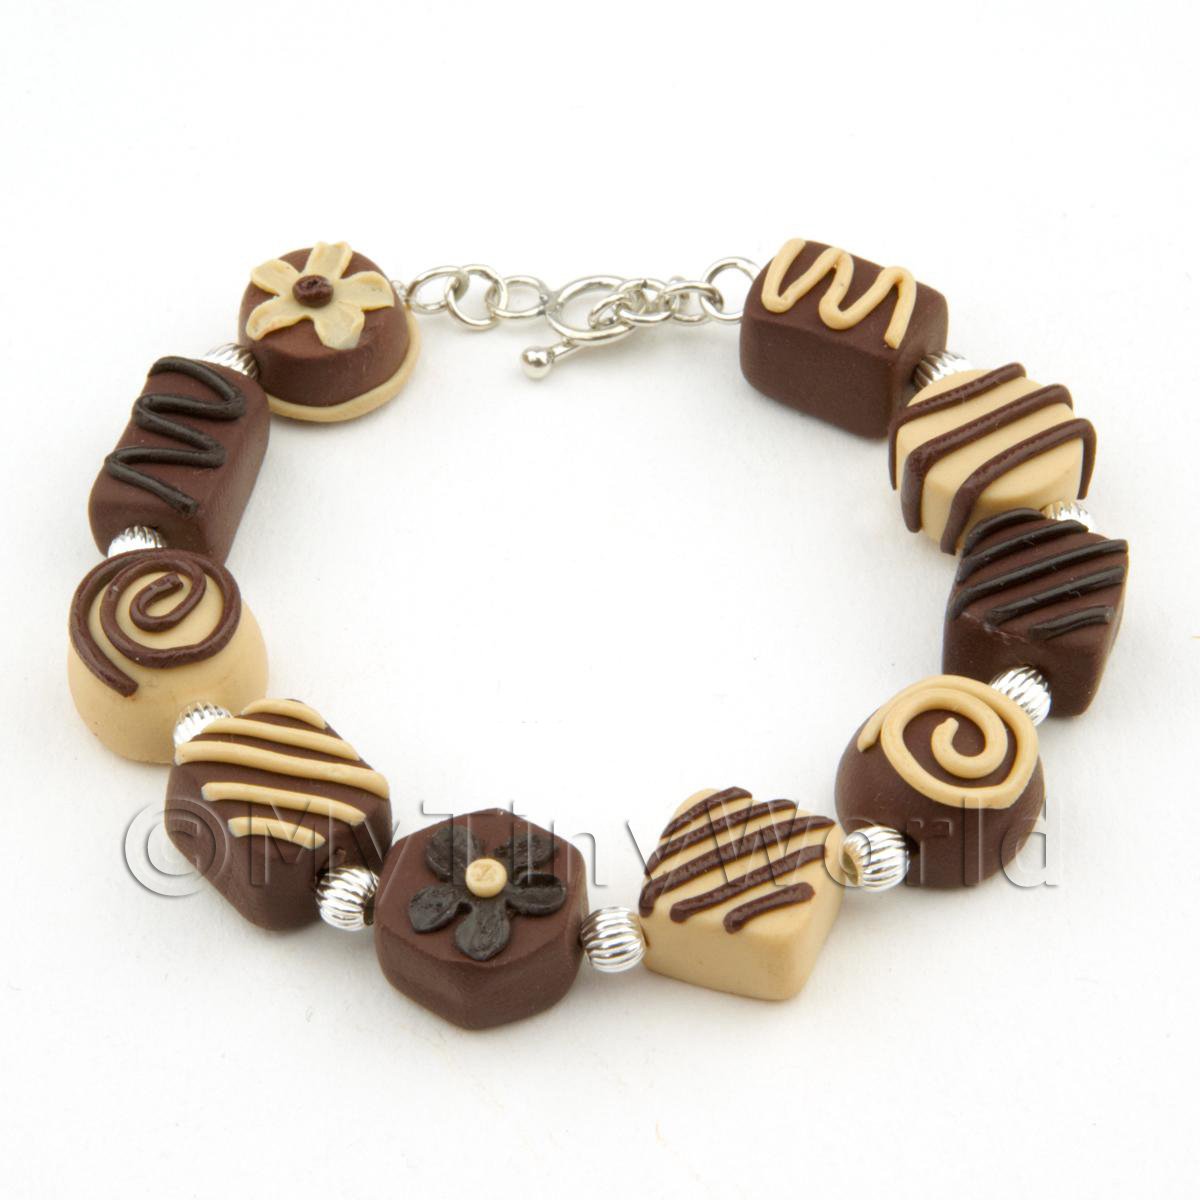 Dolls House Jewellery - Handmade Stirling Silver And Chocolate